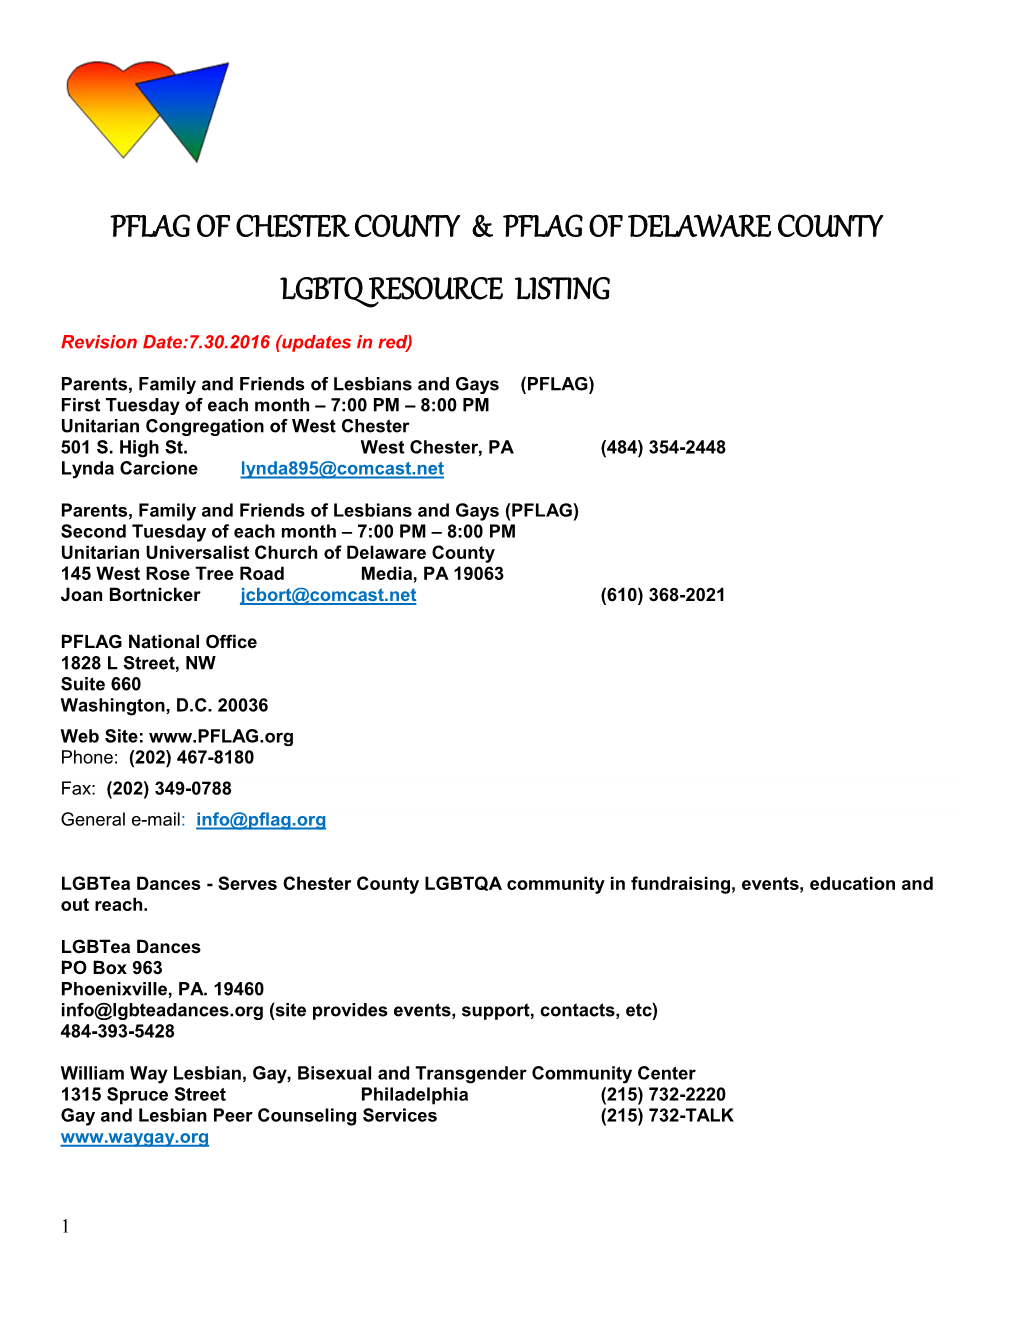 Pflag of Chester County & Pflag of Delaware County Lgbtq Resource Listing